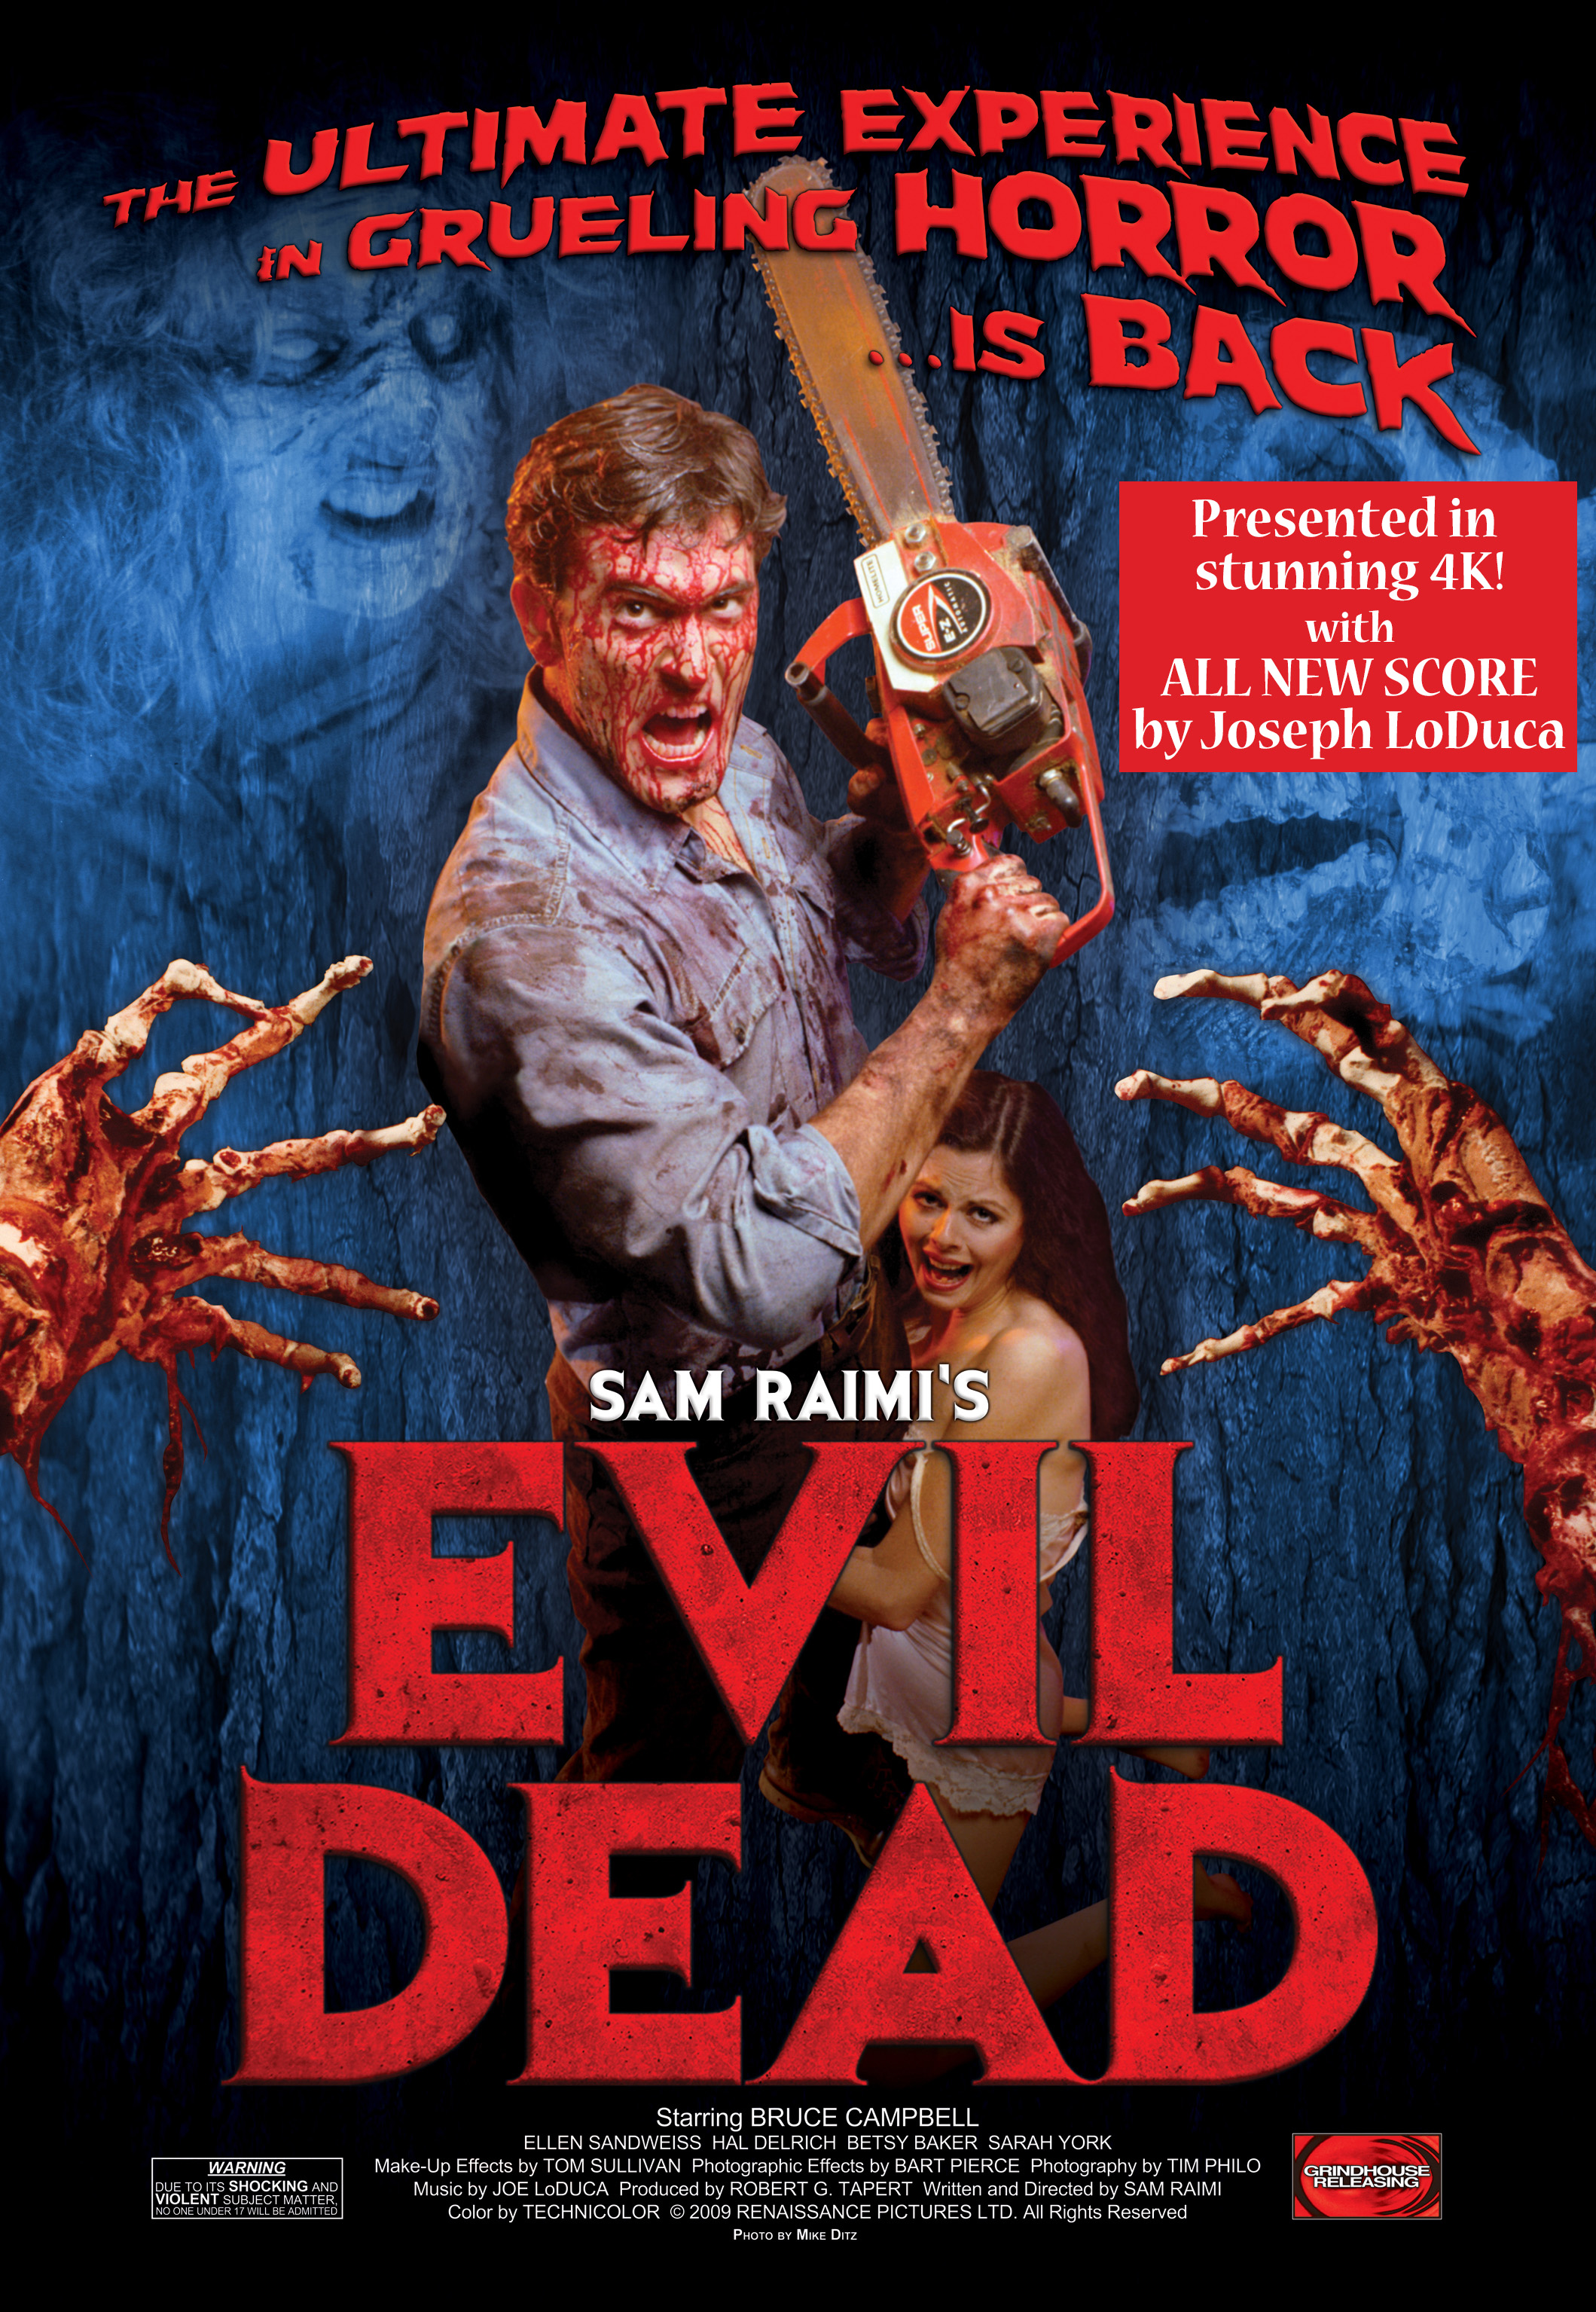 THE EVIL DEAD: 4K WITH EXCLUSIVE NEW 5.1 SURROUND SOUNDTRACK